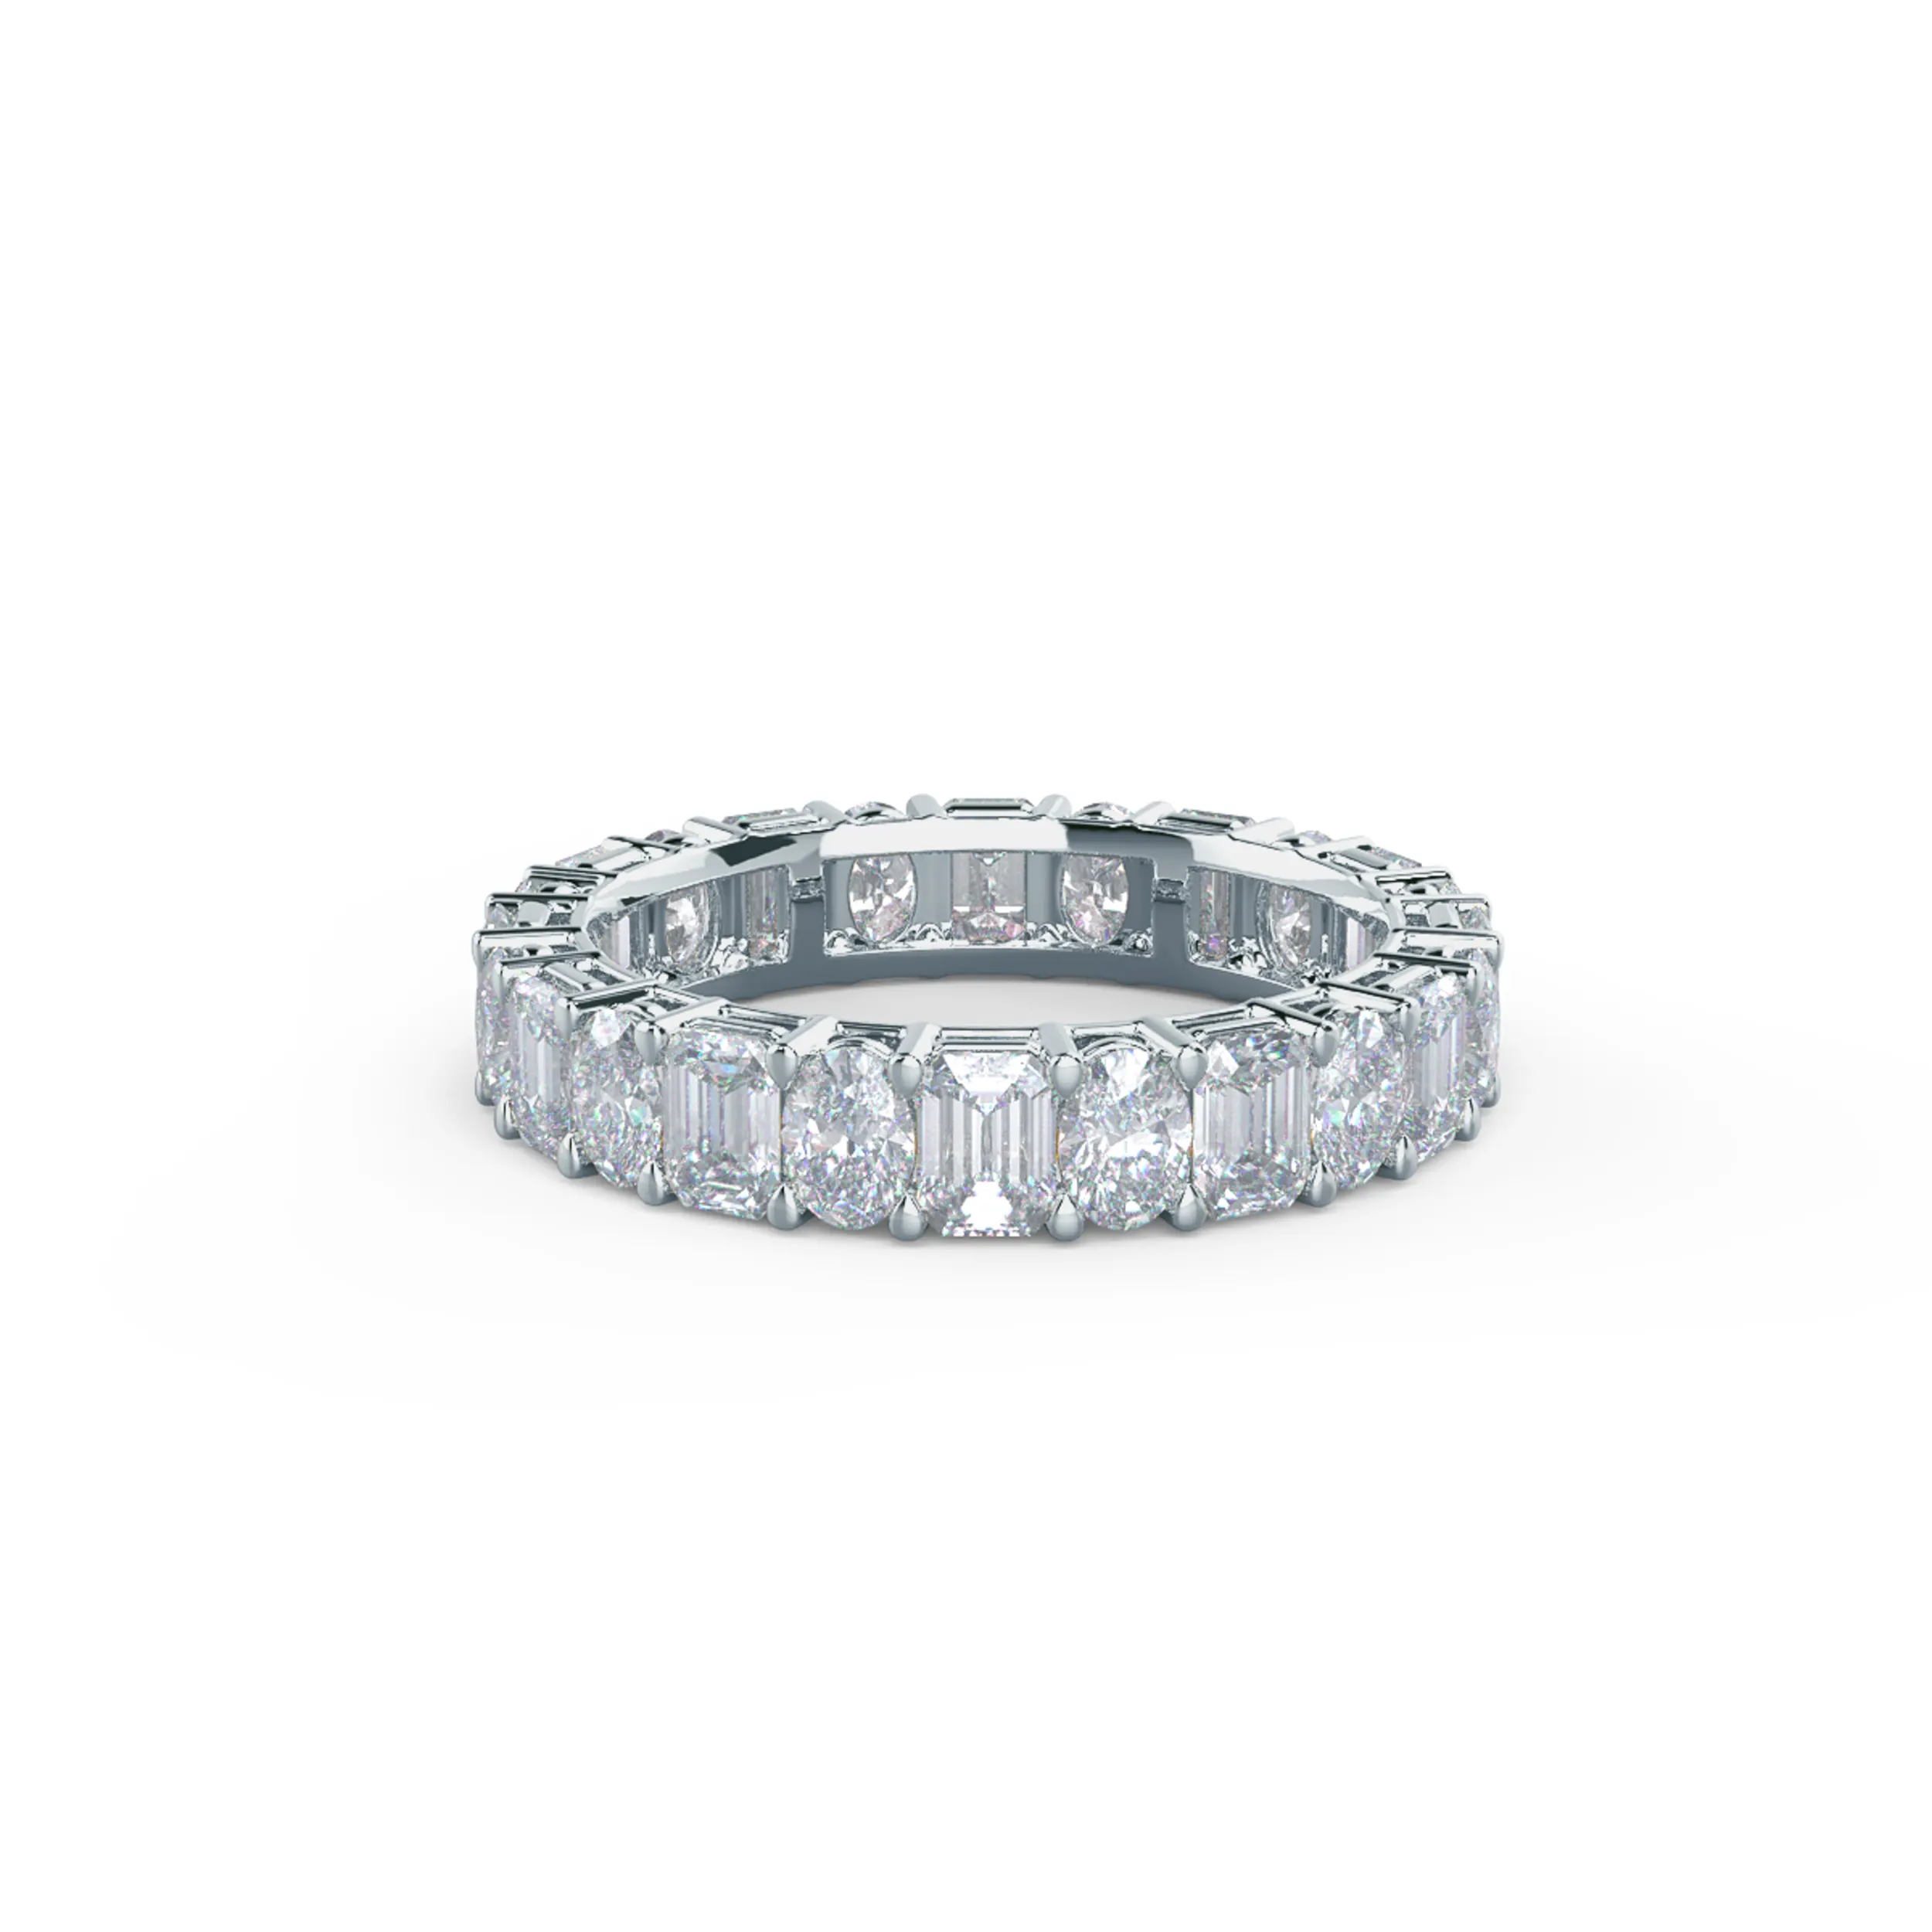 5.5 ct Lab Diamonds set in 18k White Gold Emerald and Oval Diamond Eternity Band (Main View)